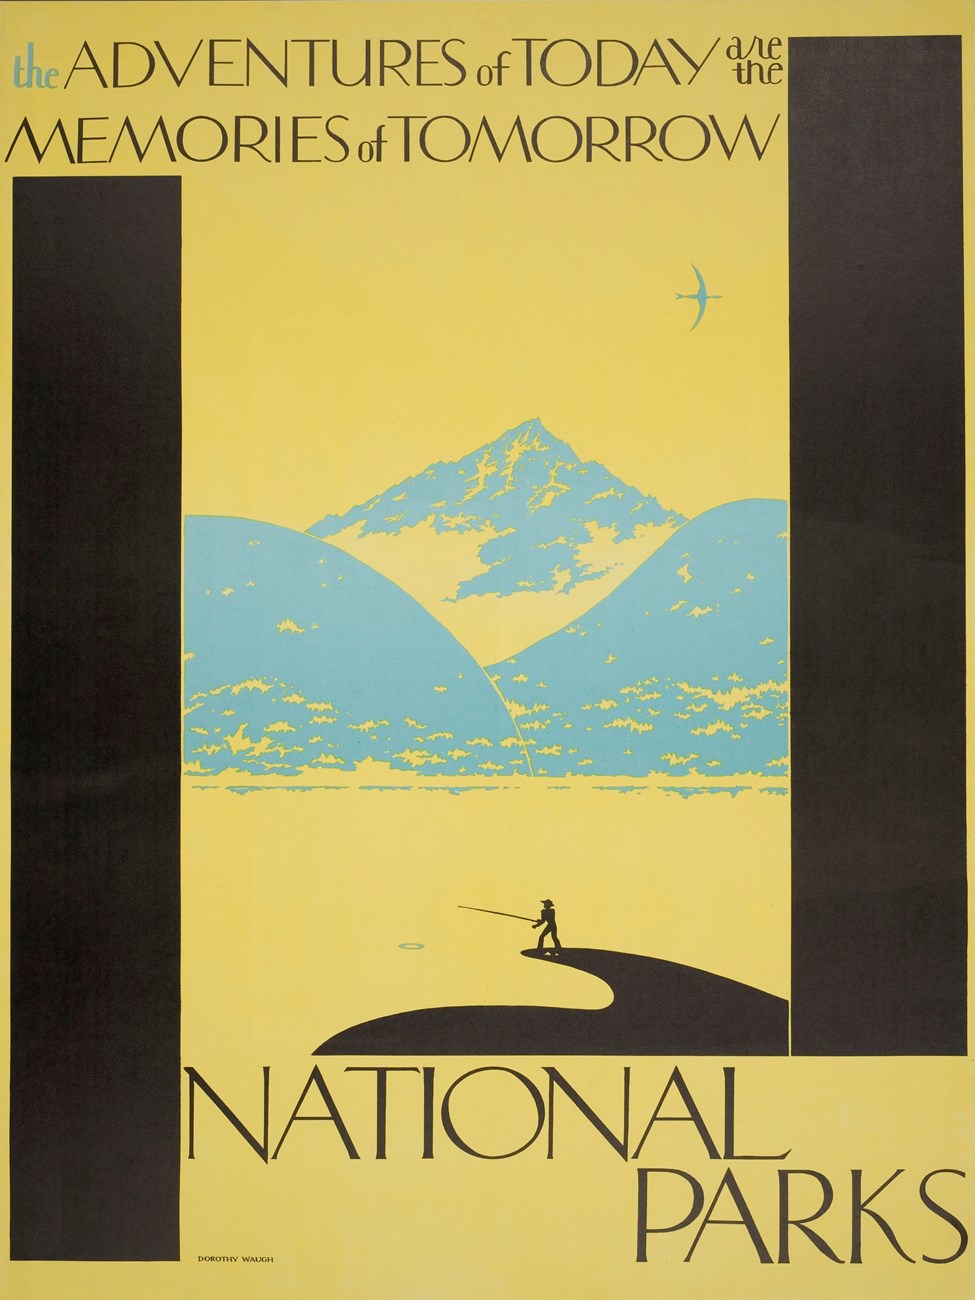 yellow poster with blue mountains. A silhouette of a man stands fishing on a spit of land jutting out into a yellow lake. Vertical black bands on each side. "Adventures of today are memories of tomorrow" above and "National Parks" below the image.